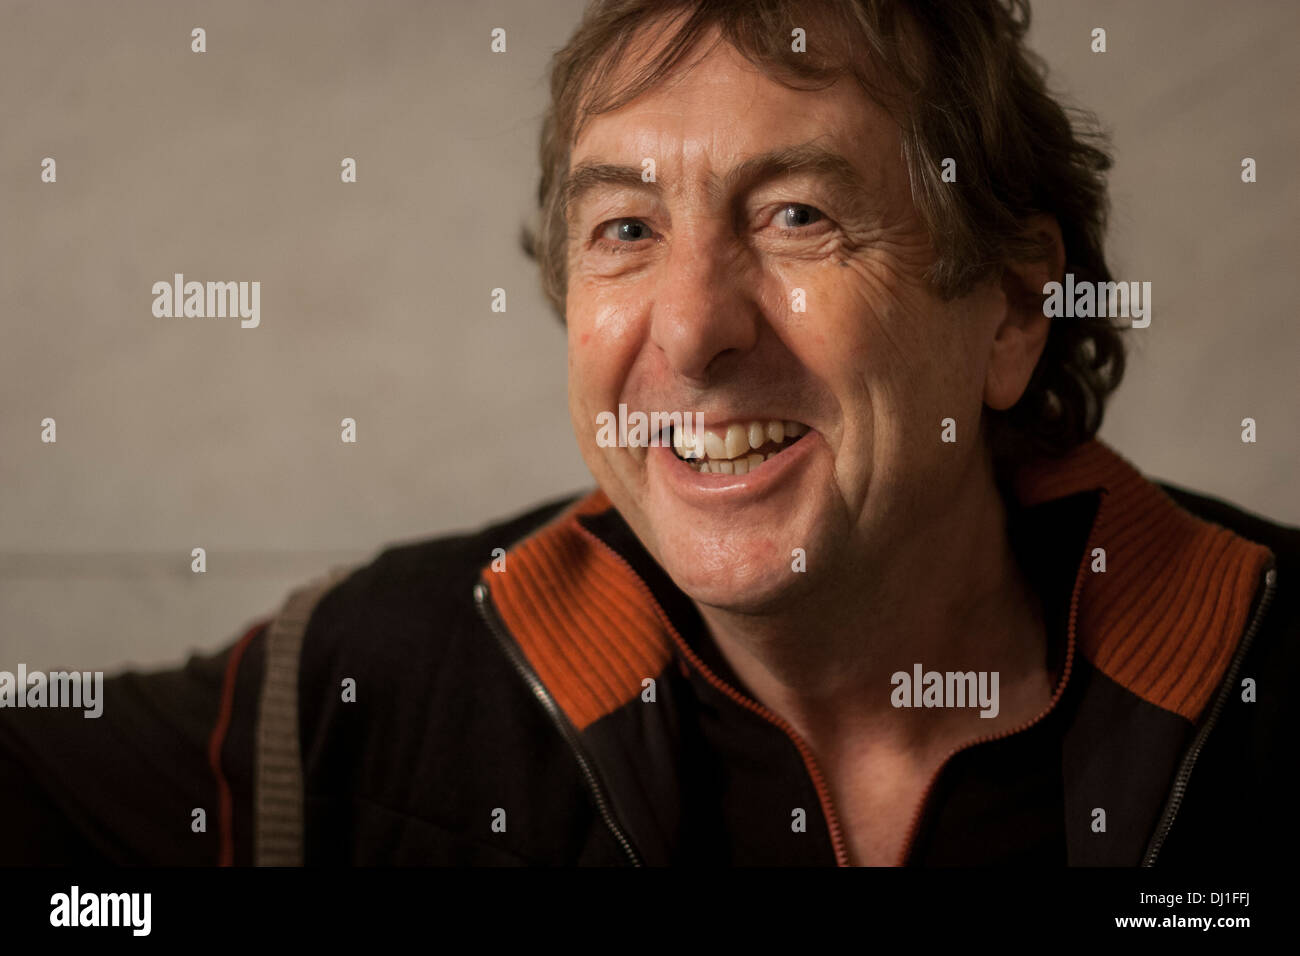 Portrait of English comedian, actor, author, writer and composer, Eric Idle. Stock Photo